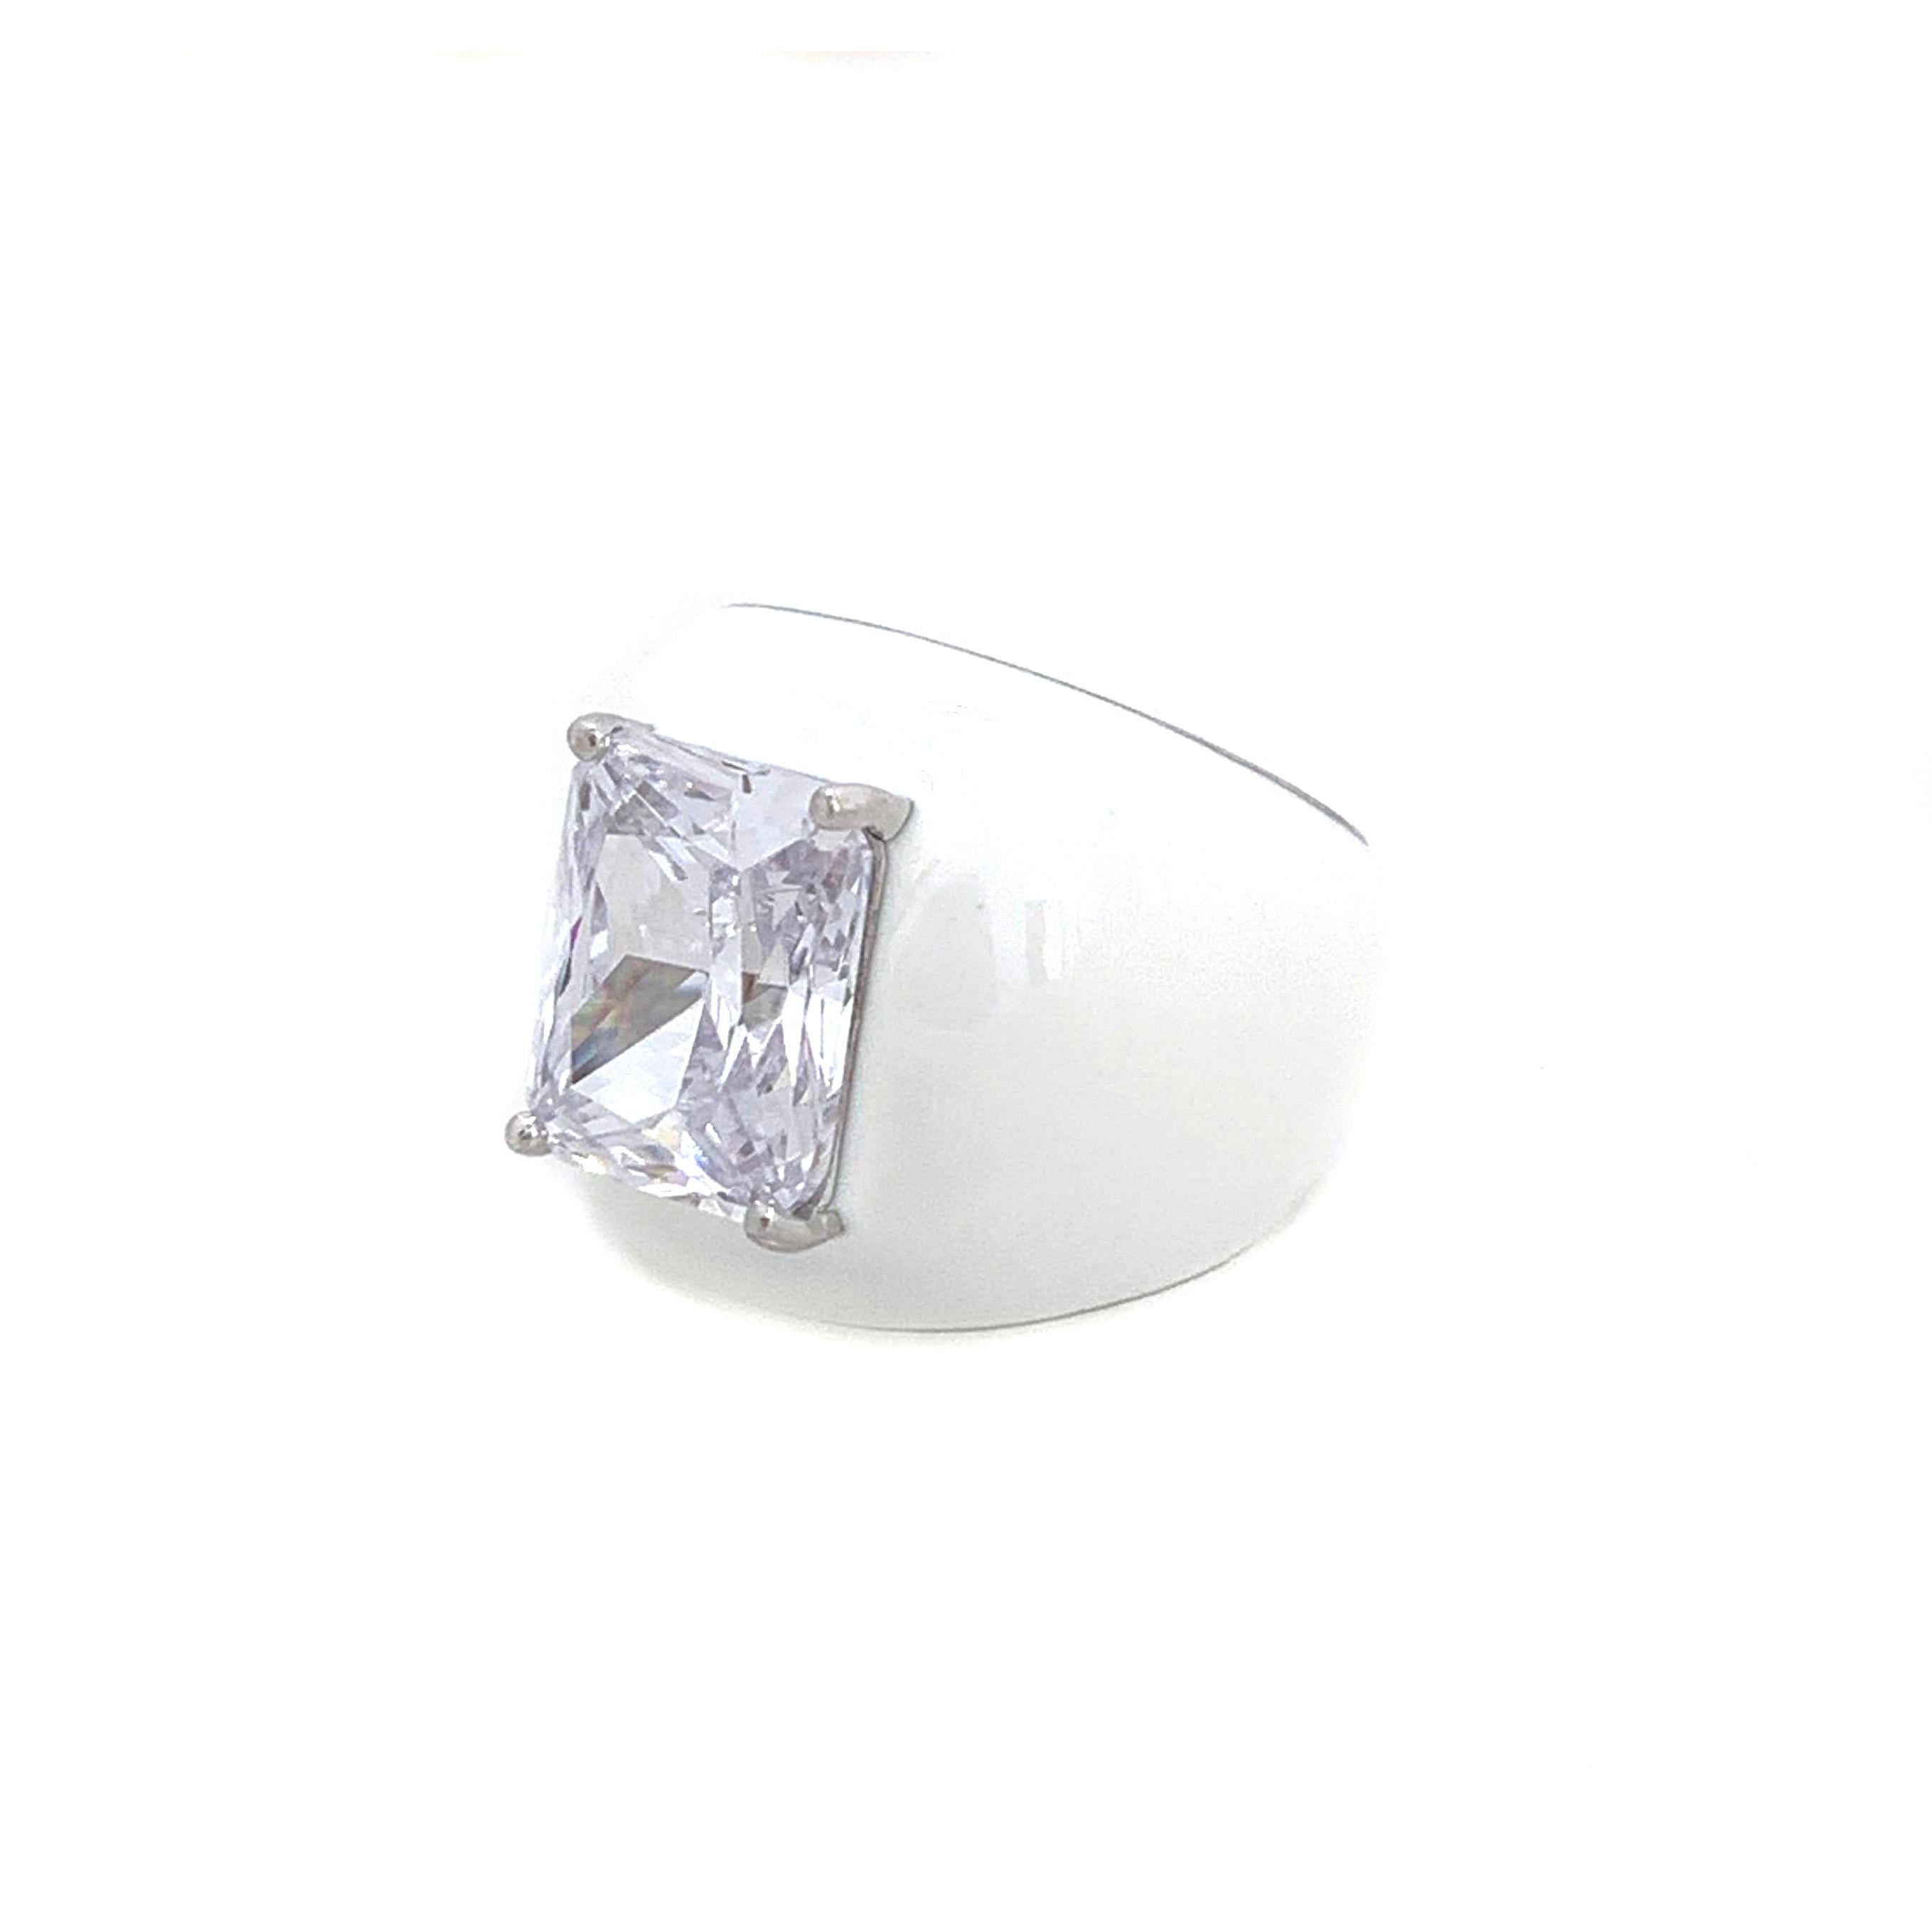 Bijoux Num Faux Diamond White Enamel Bombe Dome Ring

This bold cocktail ring features beautiful top quality 6ct radiant-cut faux diamond cubic zirconia, handset in platinum rhodium plated sterling silver. The entire ring is sheathed in shiny white